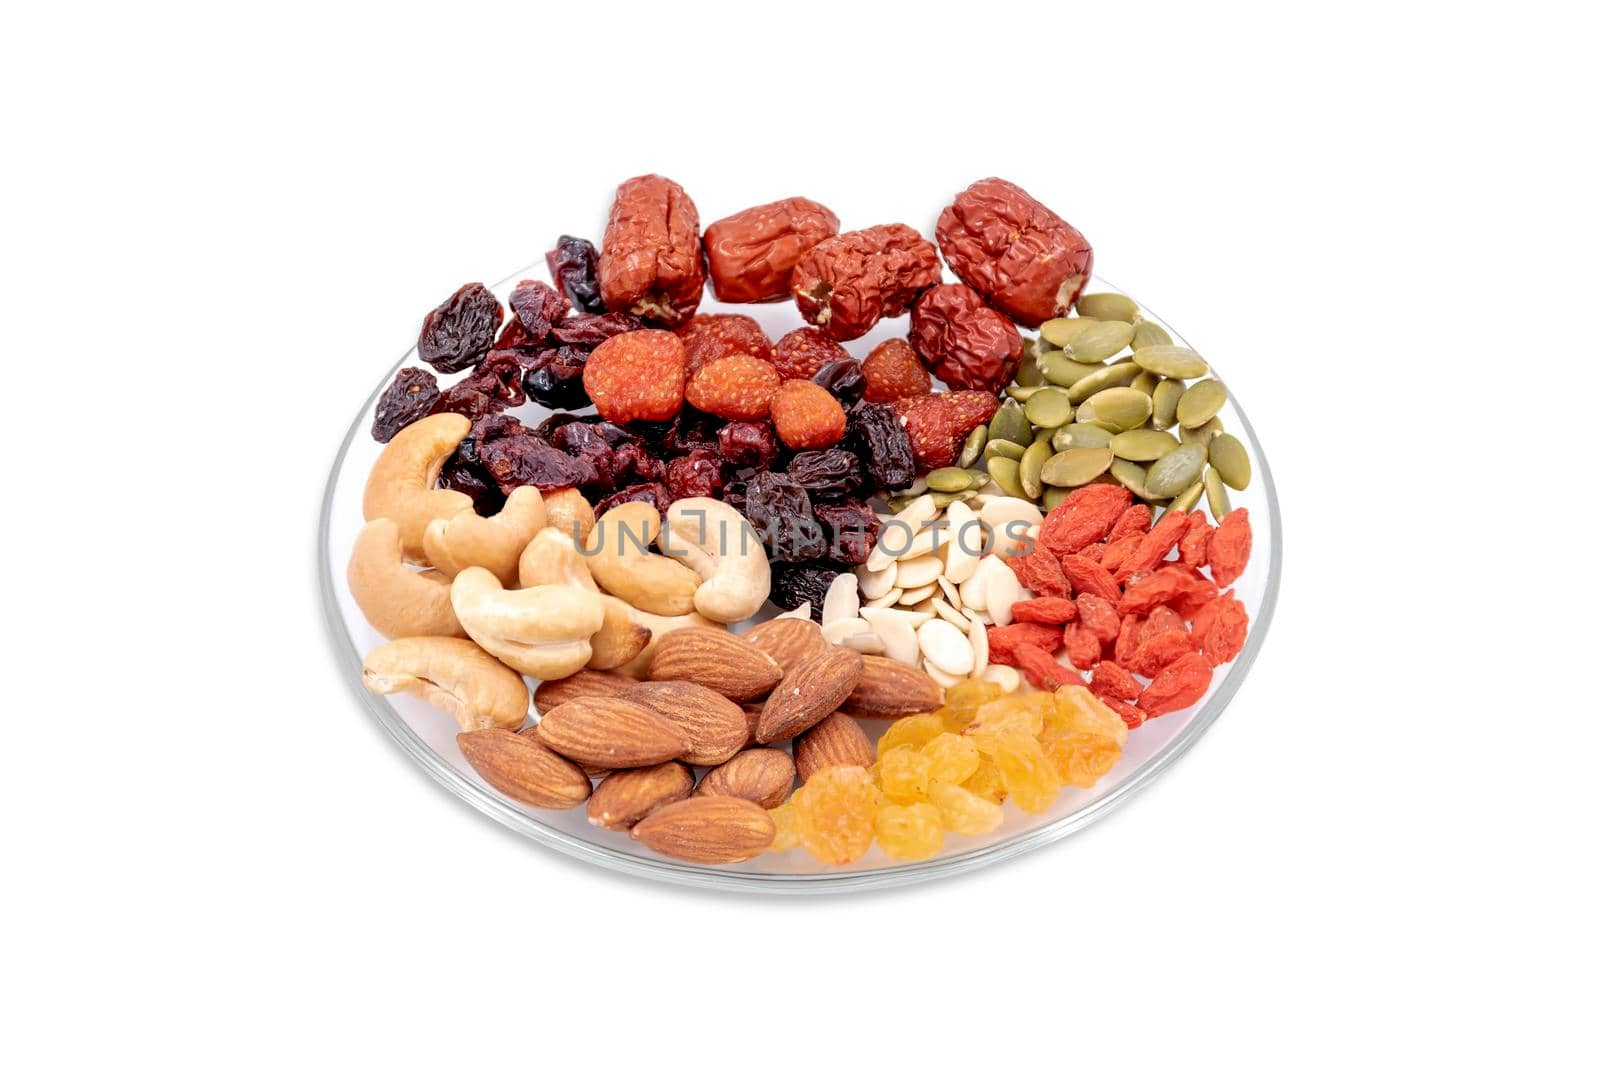 Group of whole grains and dried fruit in a glass plate isolated on white background.